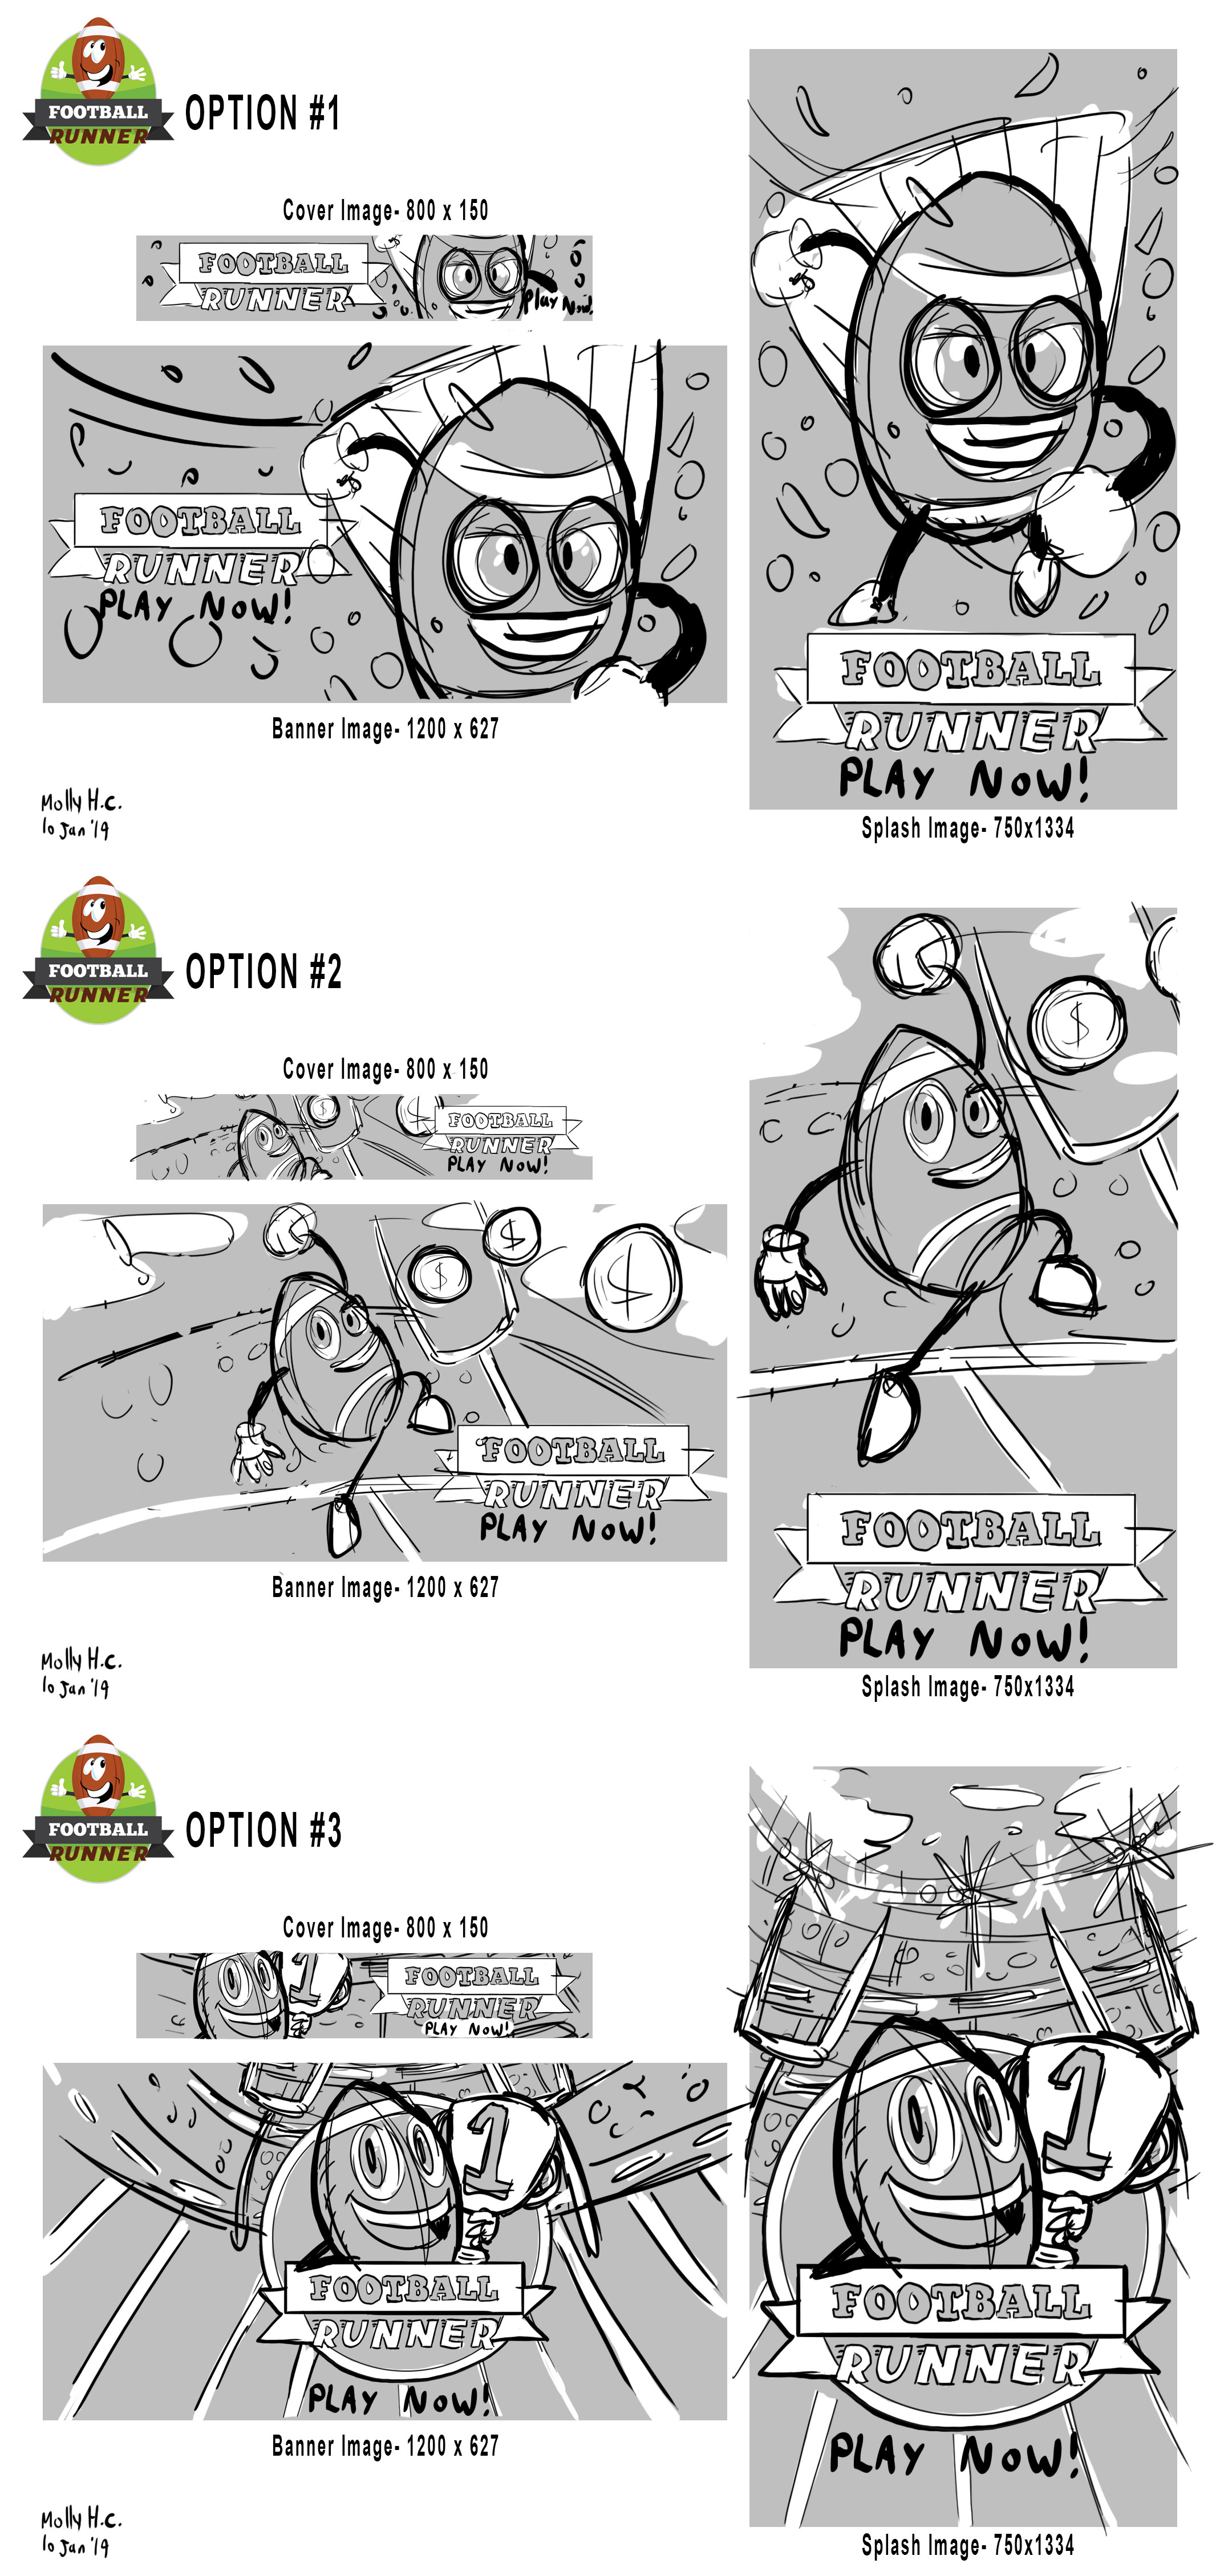 Football Runner App Promo Art Sketches
Commissioned by Fifth Tribe Studios.
(http://showcase.fifthtribe.com/)
©2019